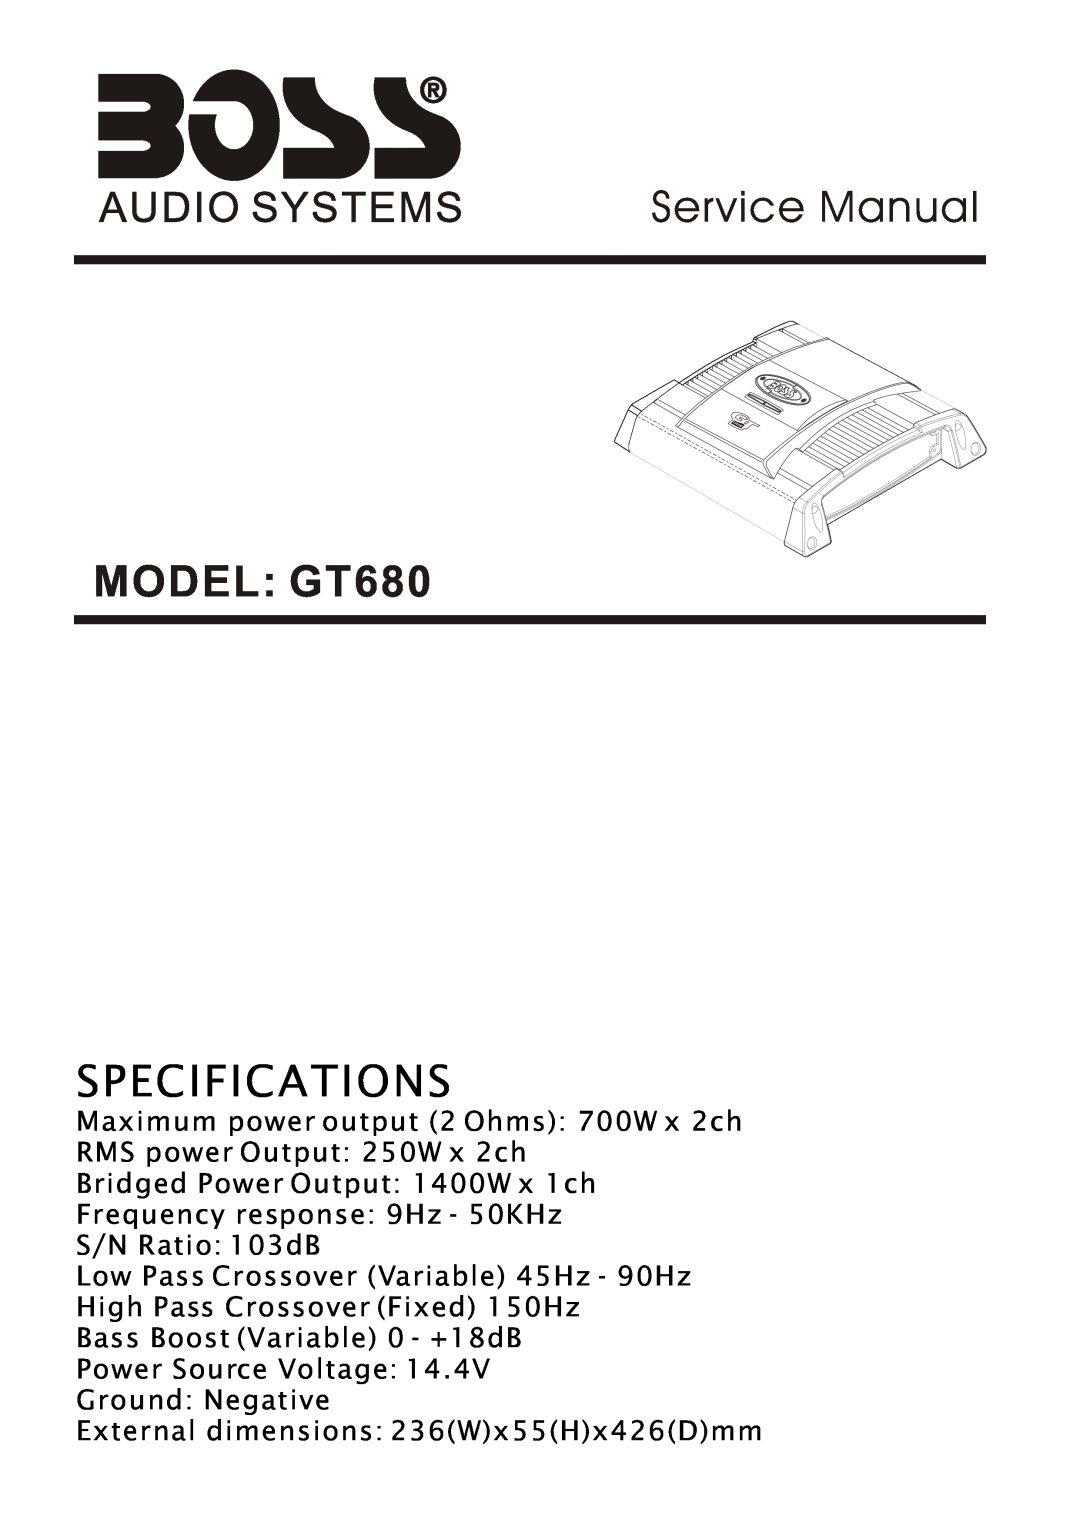 Boss Audio Systems service manual MODEL GT680, Specifications, Maximum power output 2 Ohms 700W x 2ch 